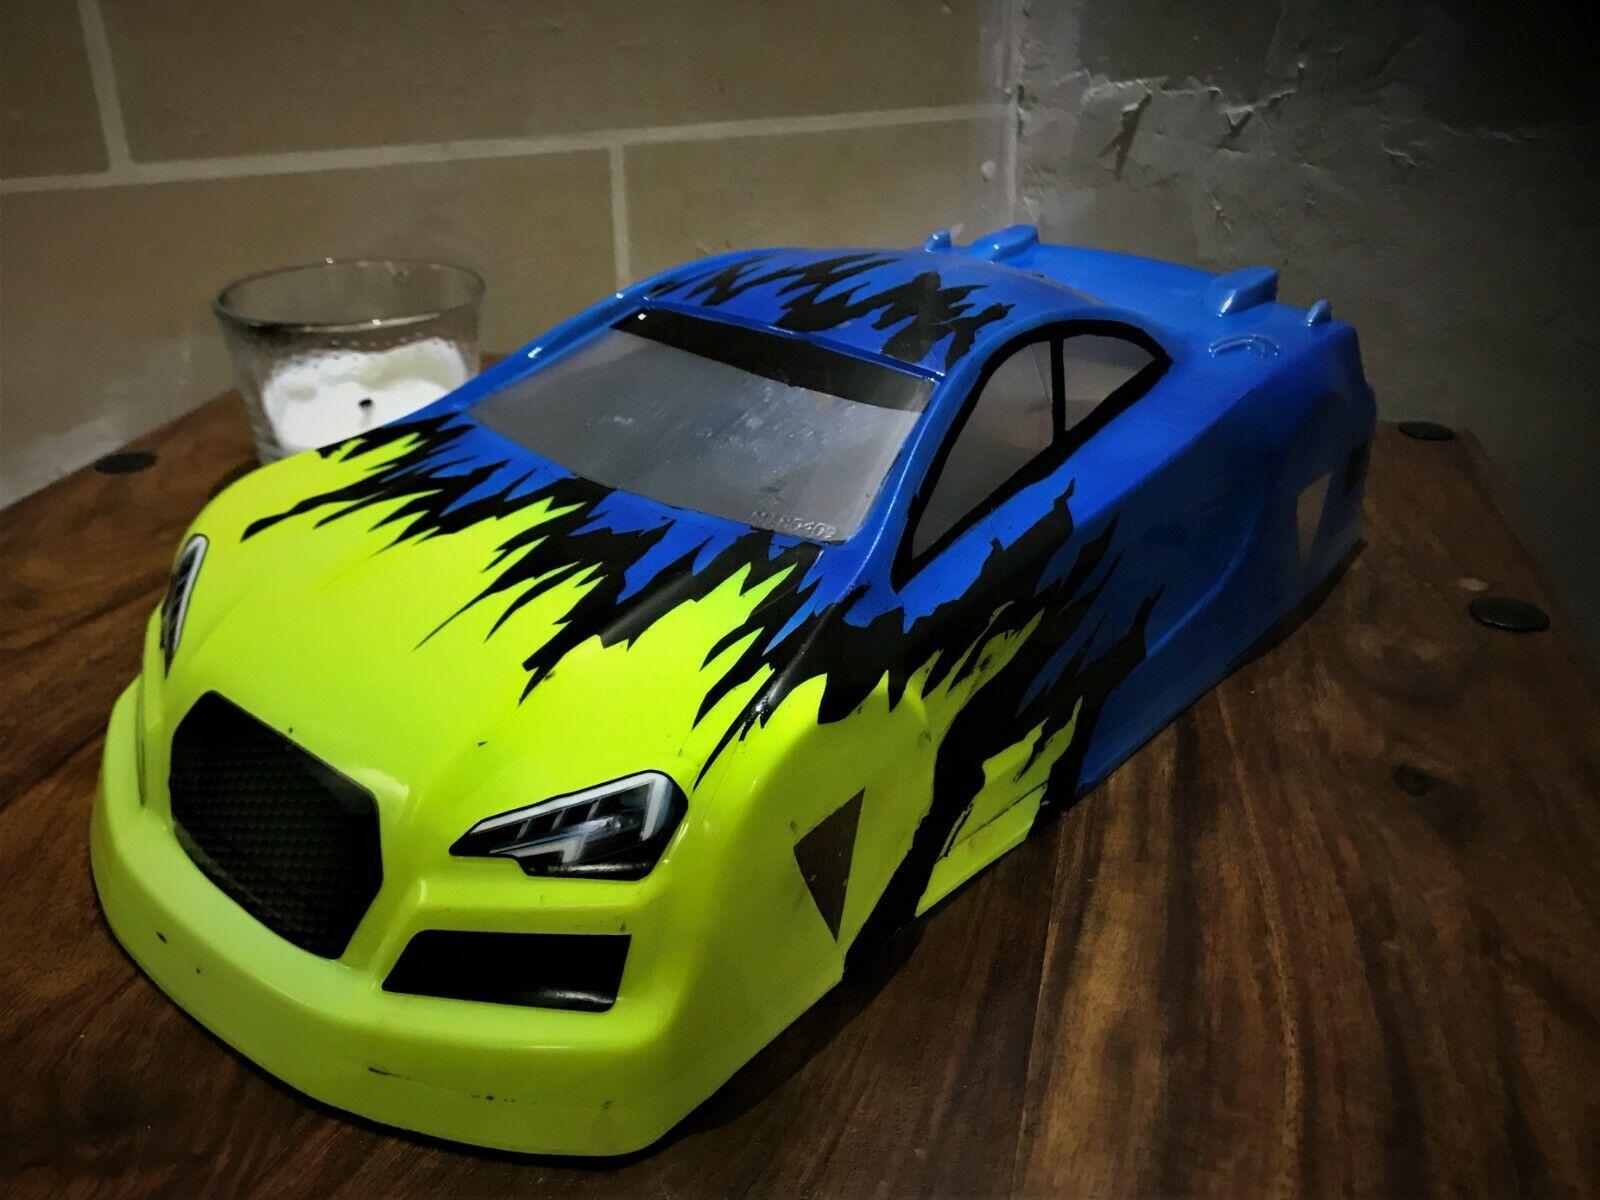 Custom Painted Rc Bodies For Sale: Different Types of Custom Painted RC Bodies for Sale